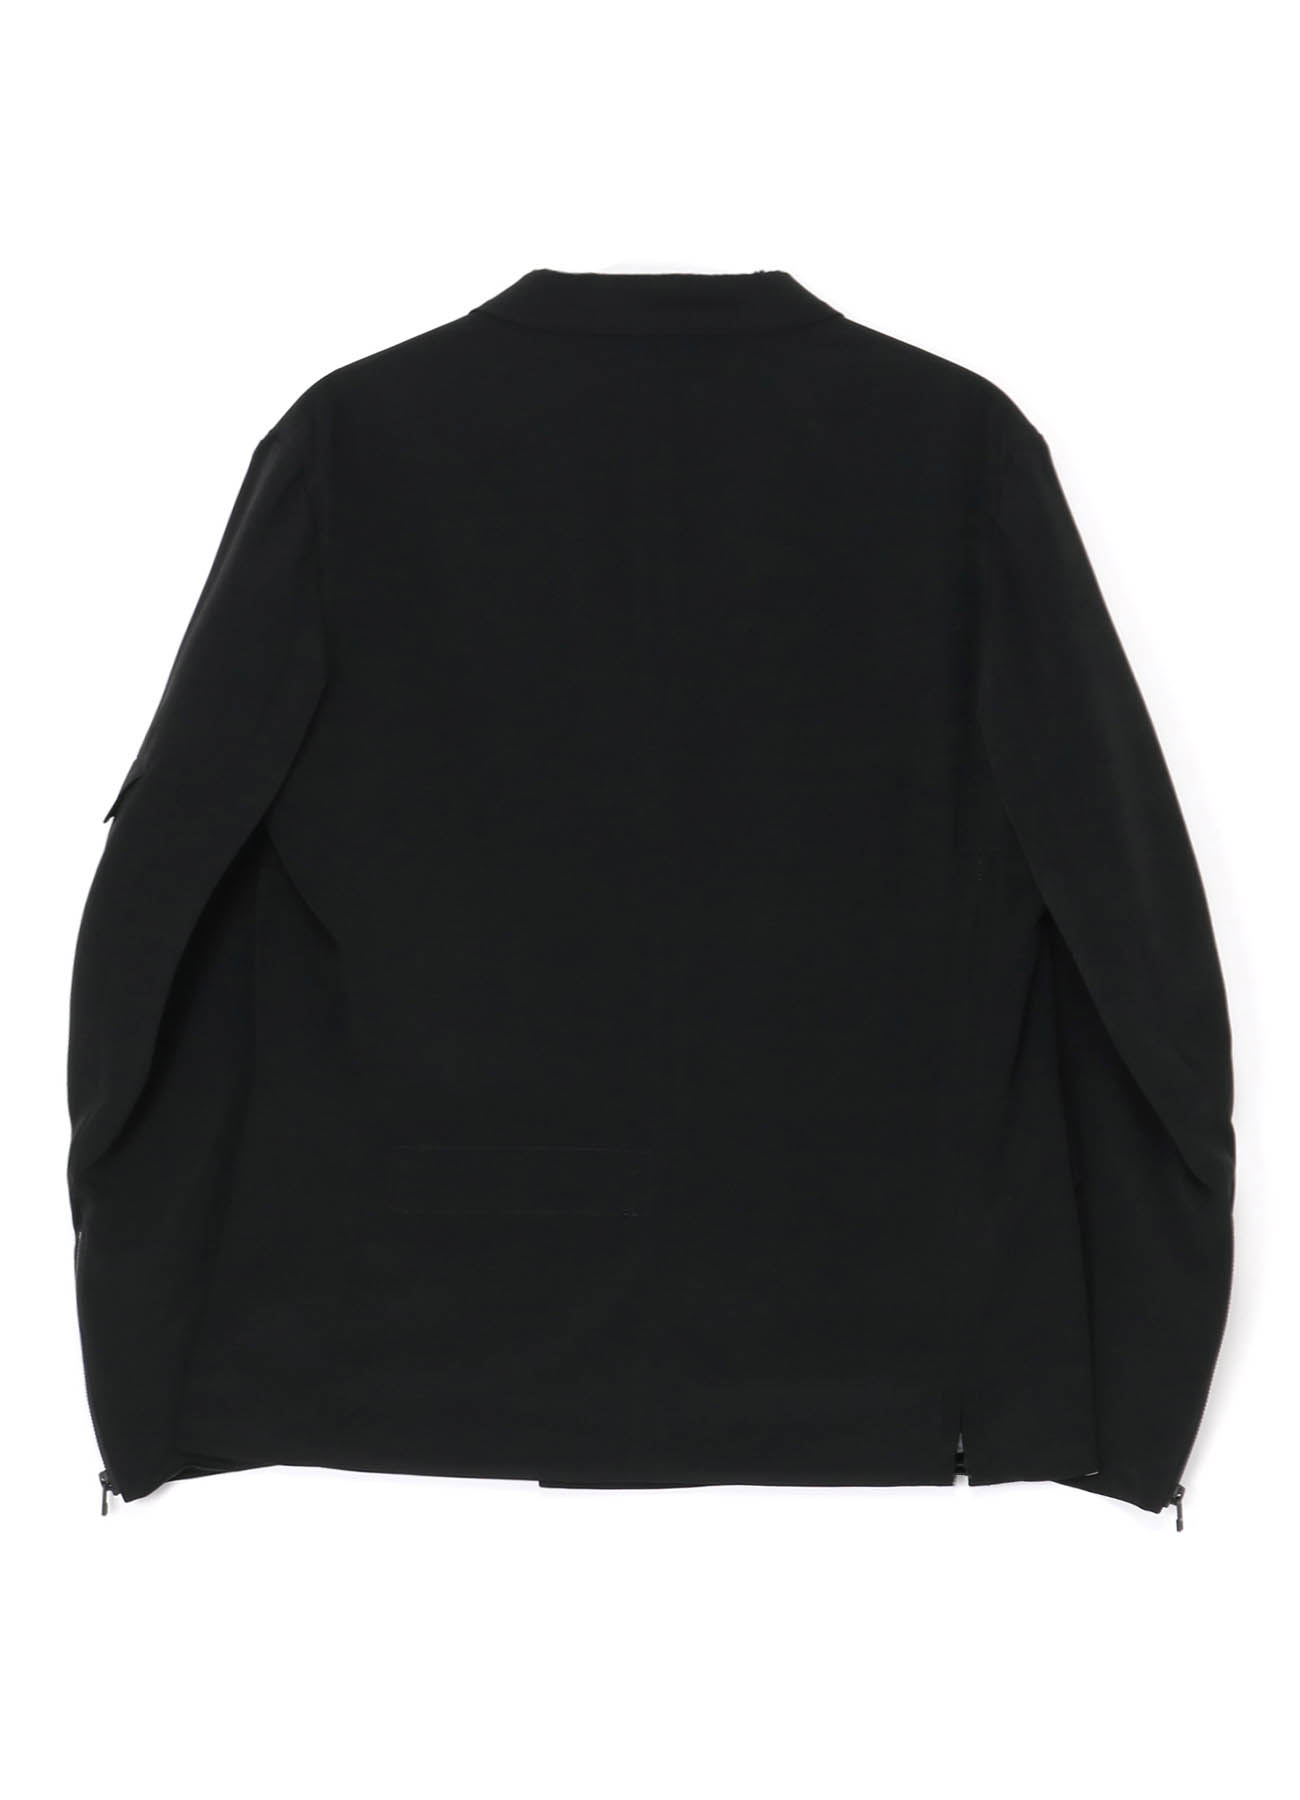 [Y's-Black Name]TRIACETATE POLYESTER CREPE de CHINE DOUBLE FRONT JACKET